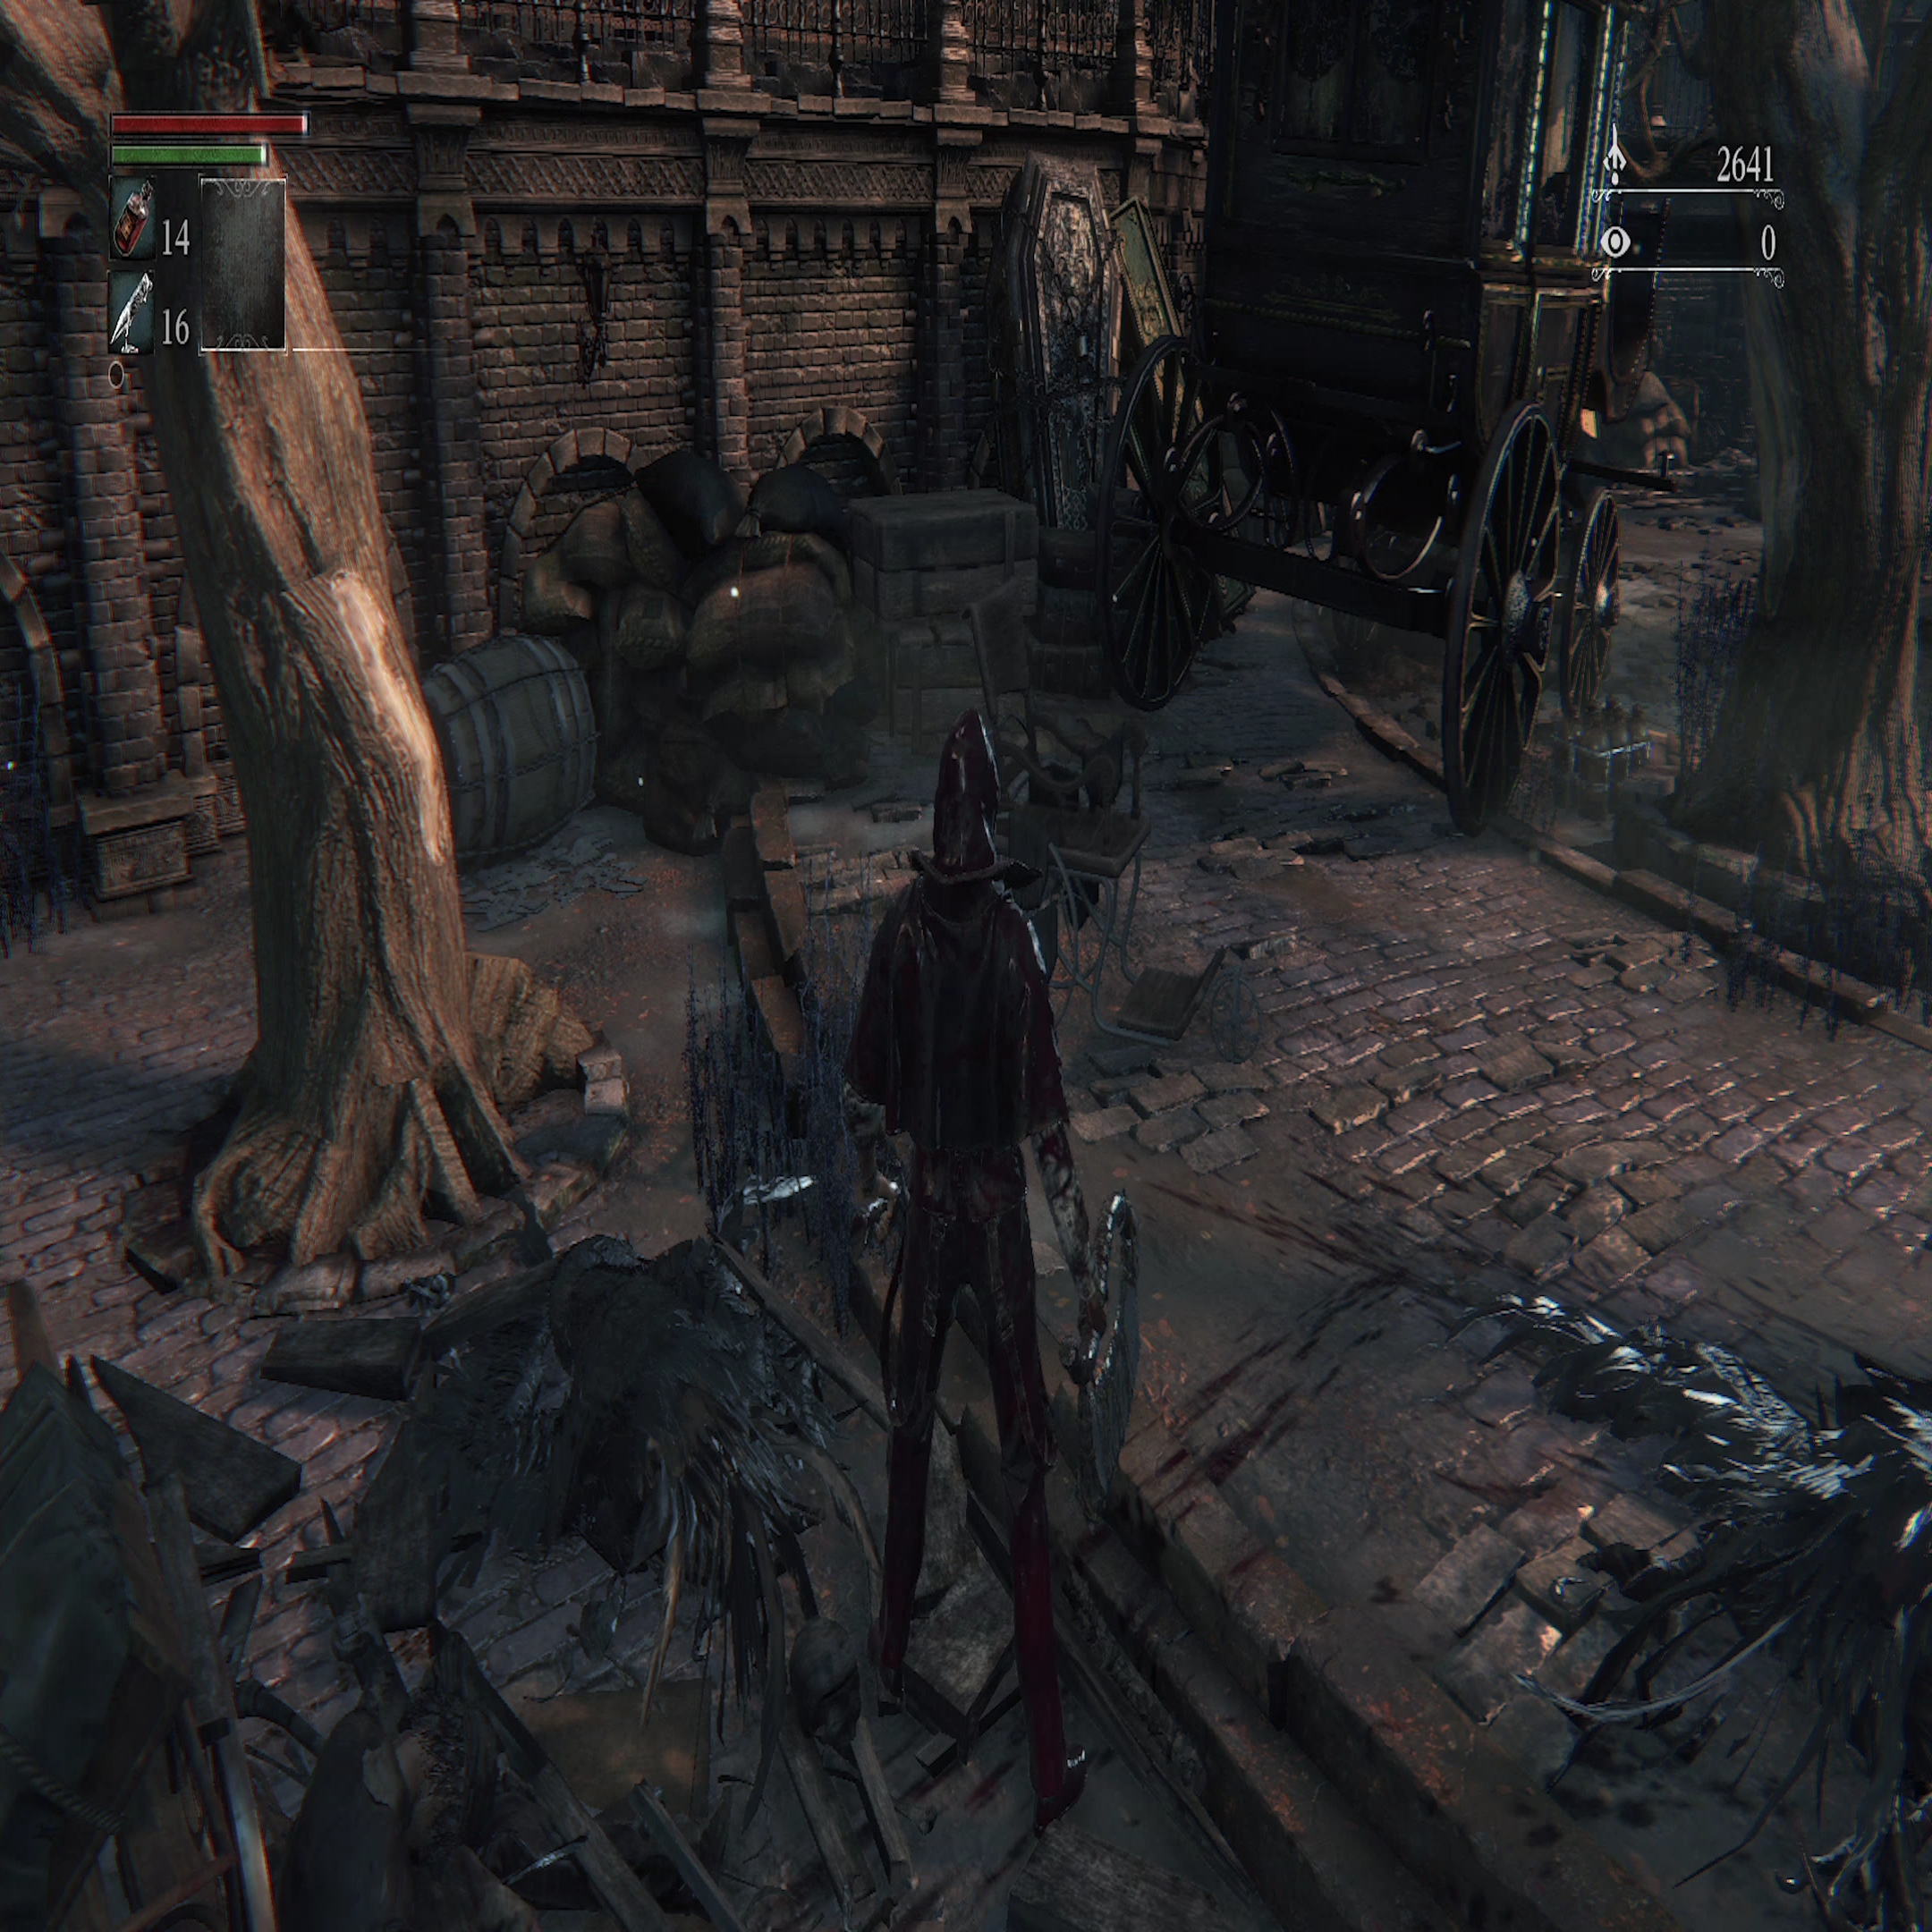 Simulated BloodBorne Remaster on PS5/PC in 4K Resolution at 60FPS Has us  Wanting a Proper Remaster Even More